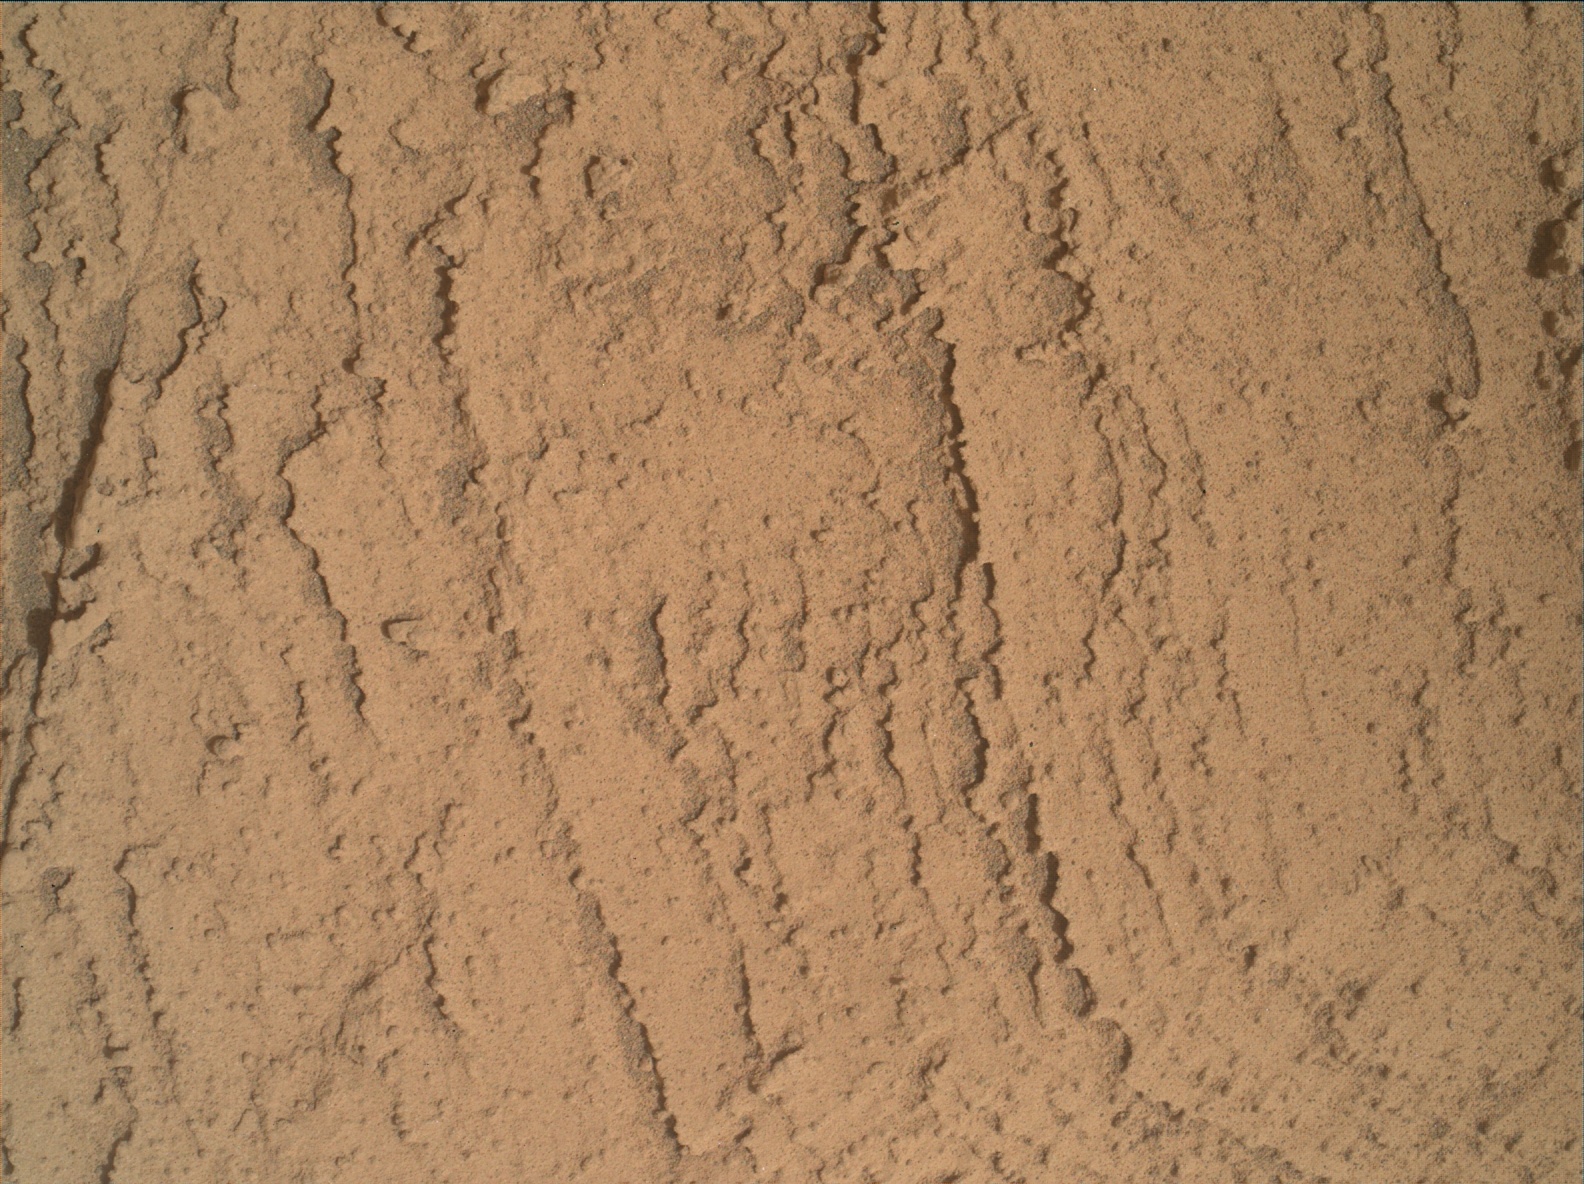 Nasa's Mars rover Curiosity acquired this image using its Mars Hand Lens Imager (MAHLI) on Sol 3476